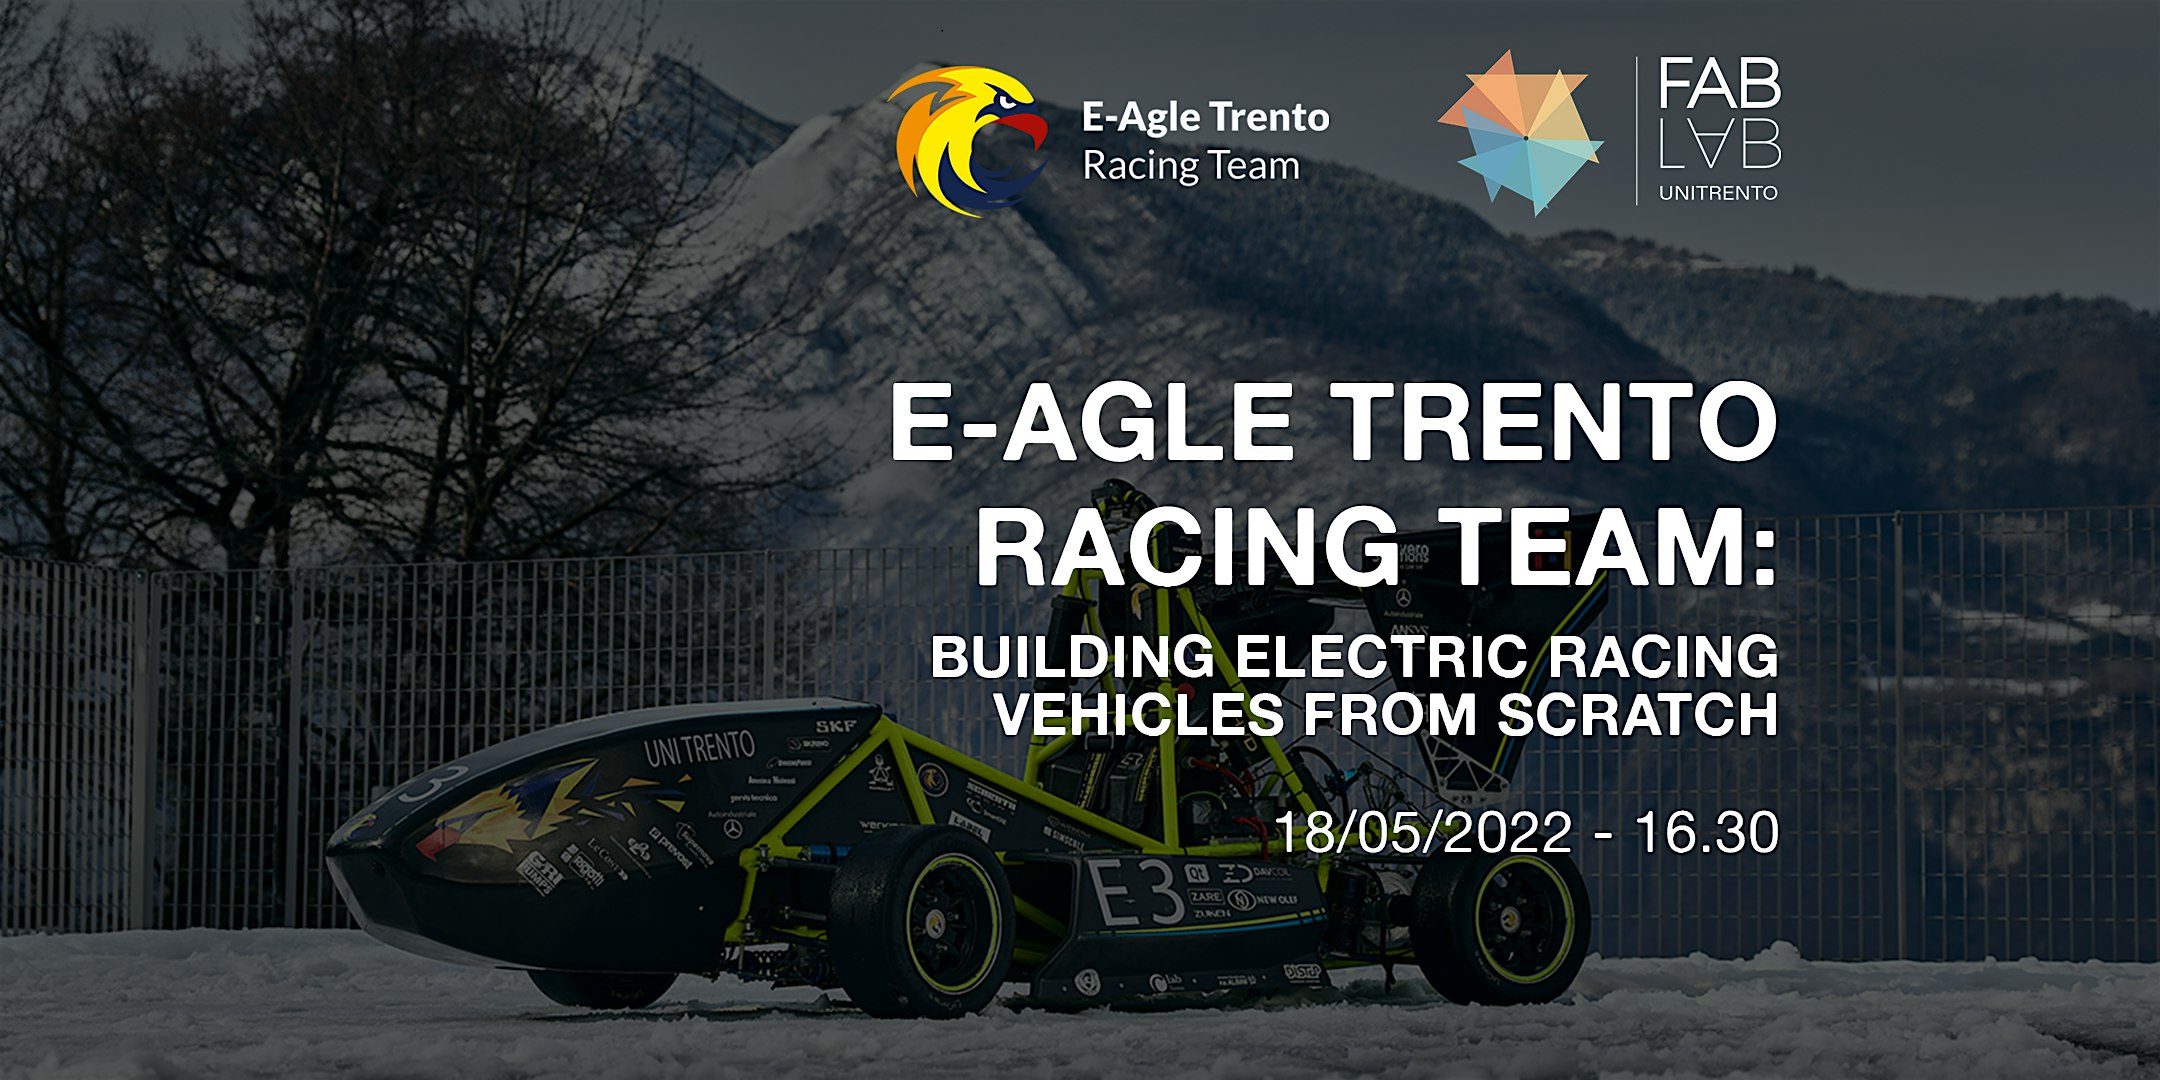 E-Agle Trento Racing Team: building electric racing vehicles from scratch